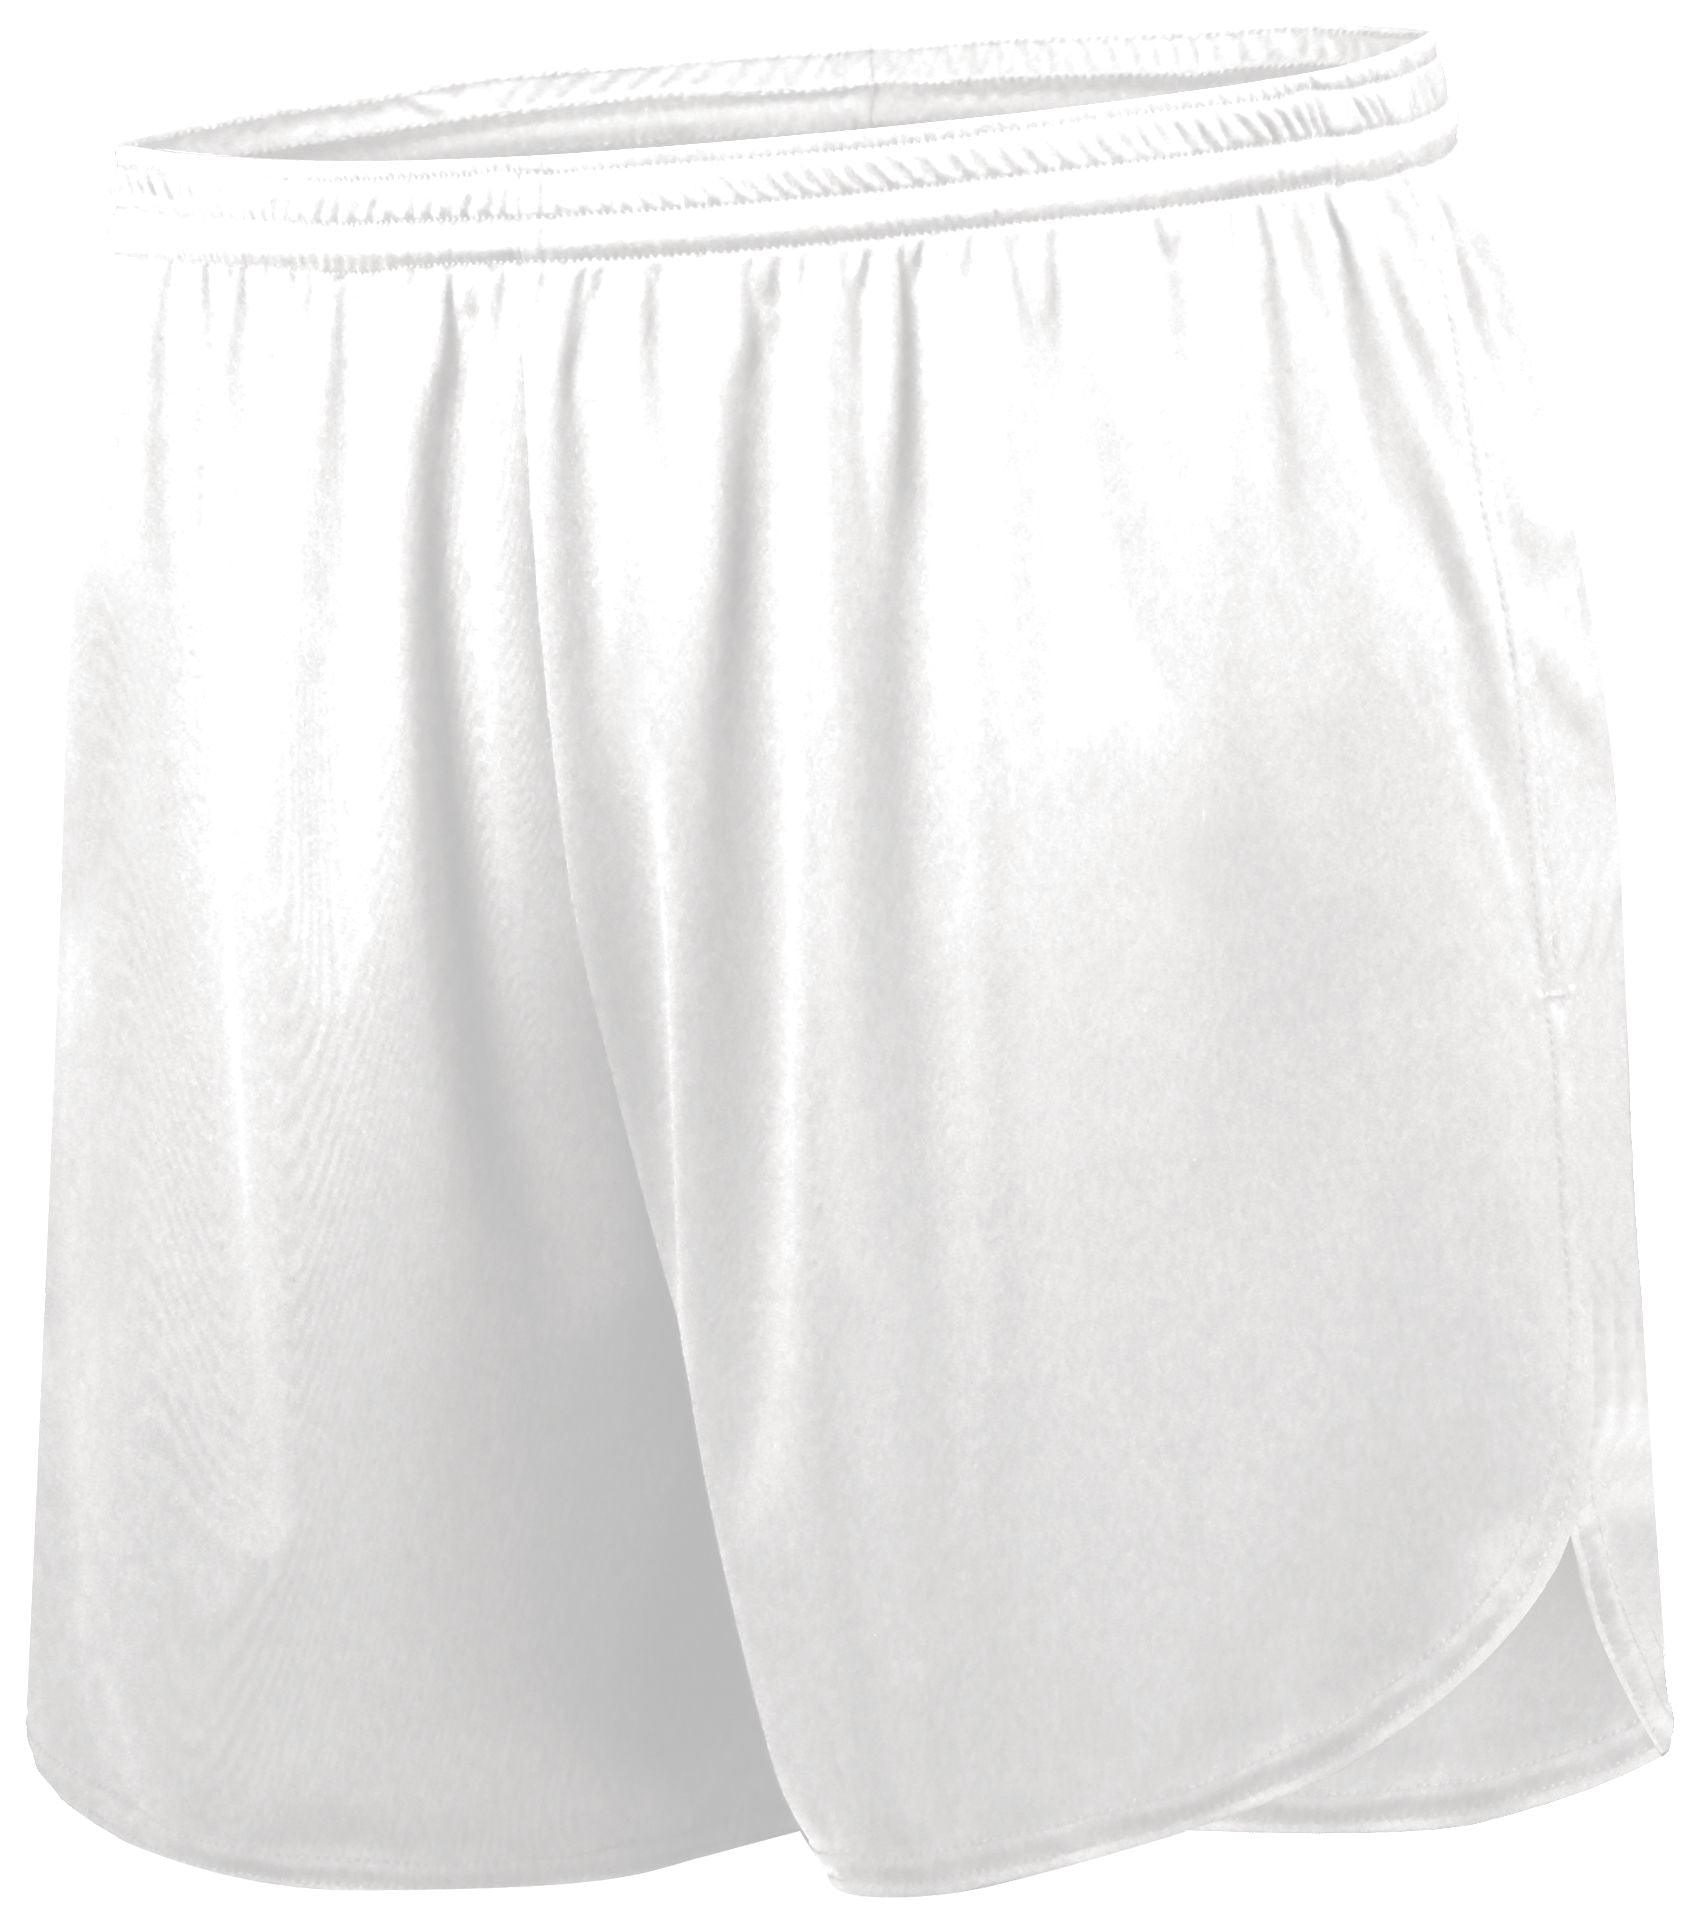 Holloway Pr Max Track Shorts in White  -Part of the Adult, Adult-Shorts, Track-Field, Holloway product lines at KanaleyCreations.com